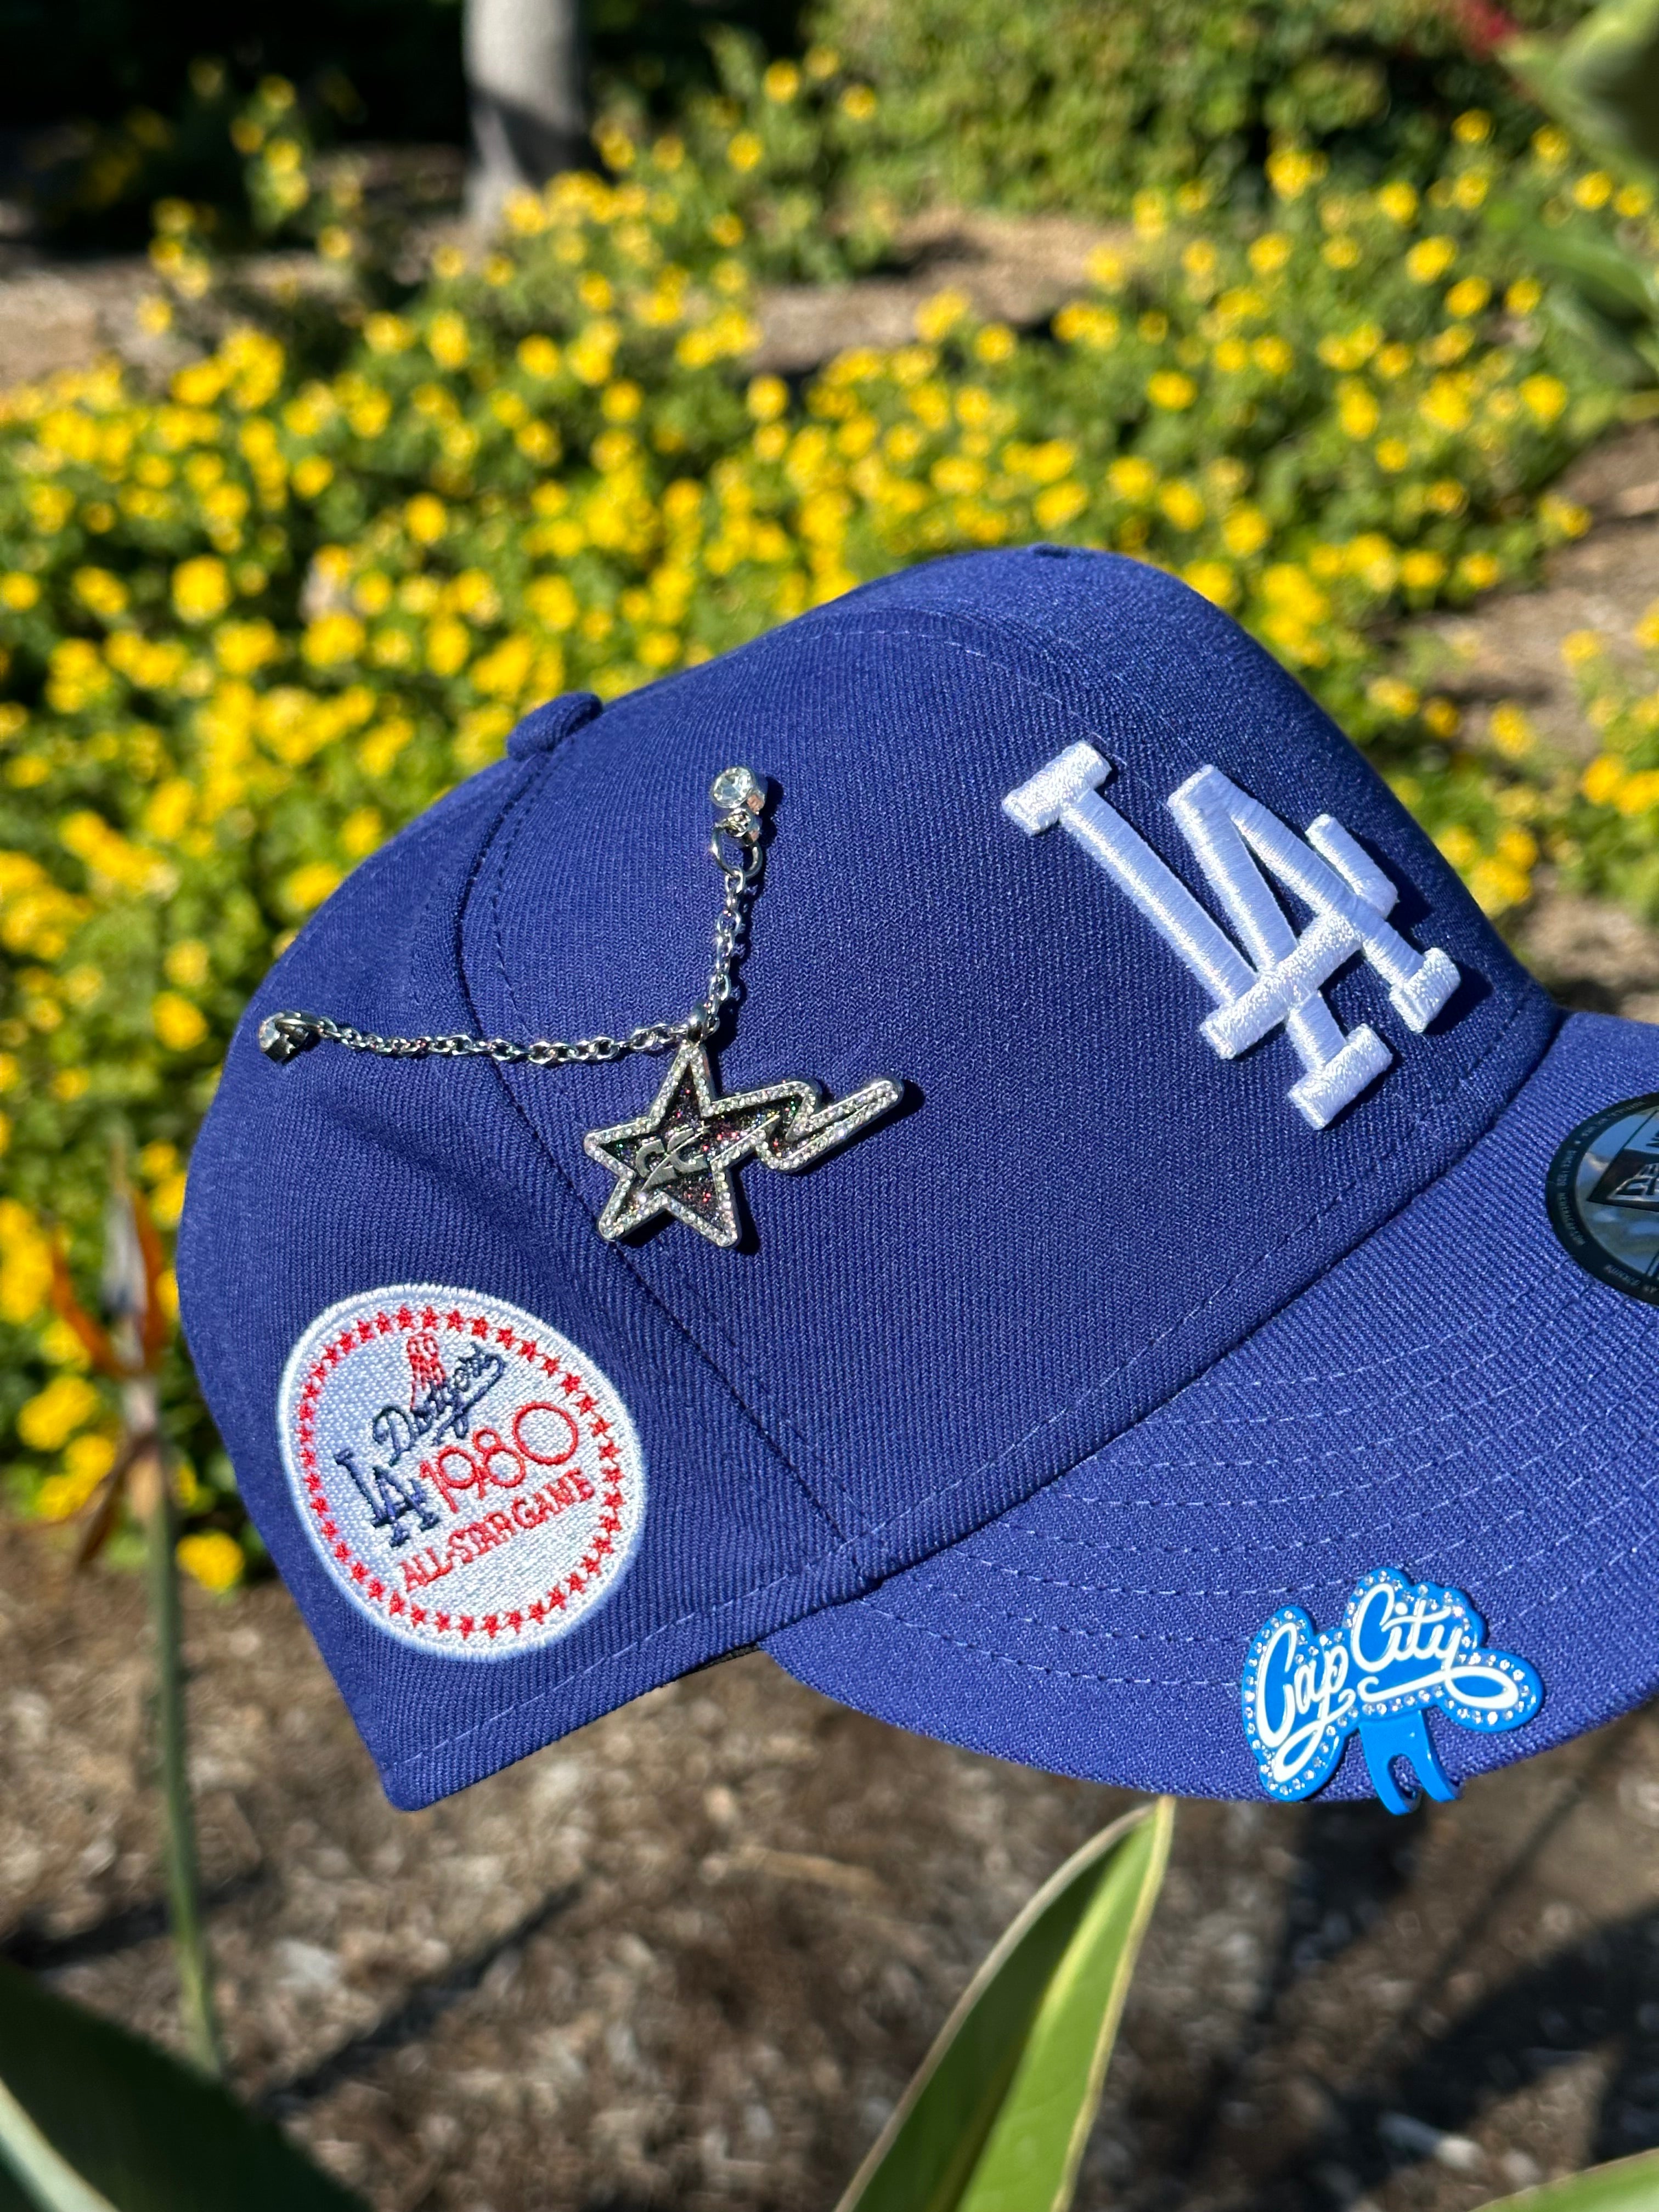 NEW ERA EXCLUSIVE 9FIFTY BLUE LOS ANGELES DODGERS SNAPBACK W/ 1980 ALL STAR GAME PATCH